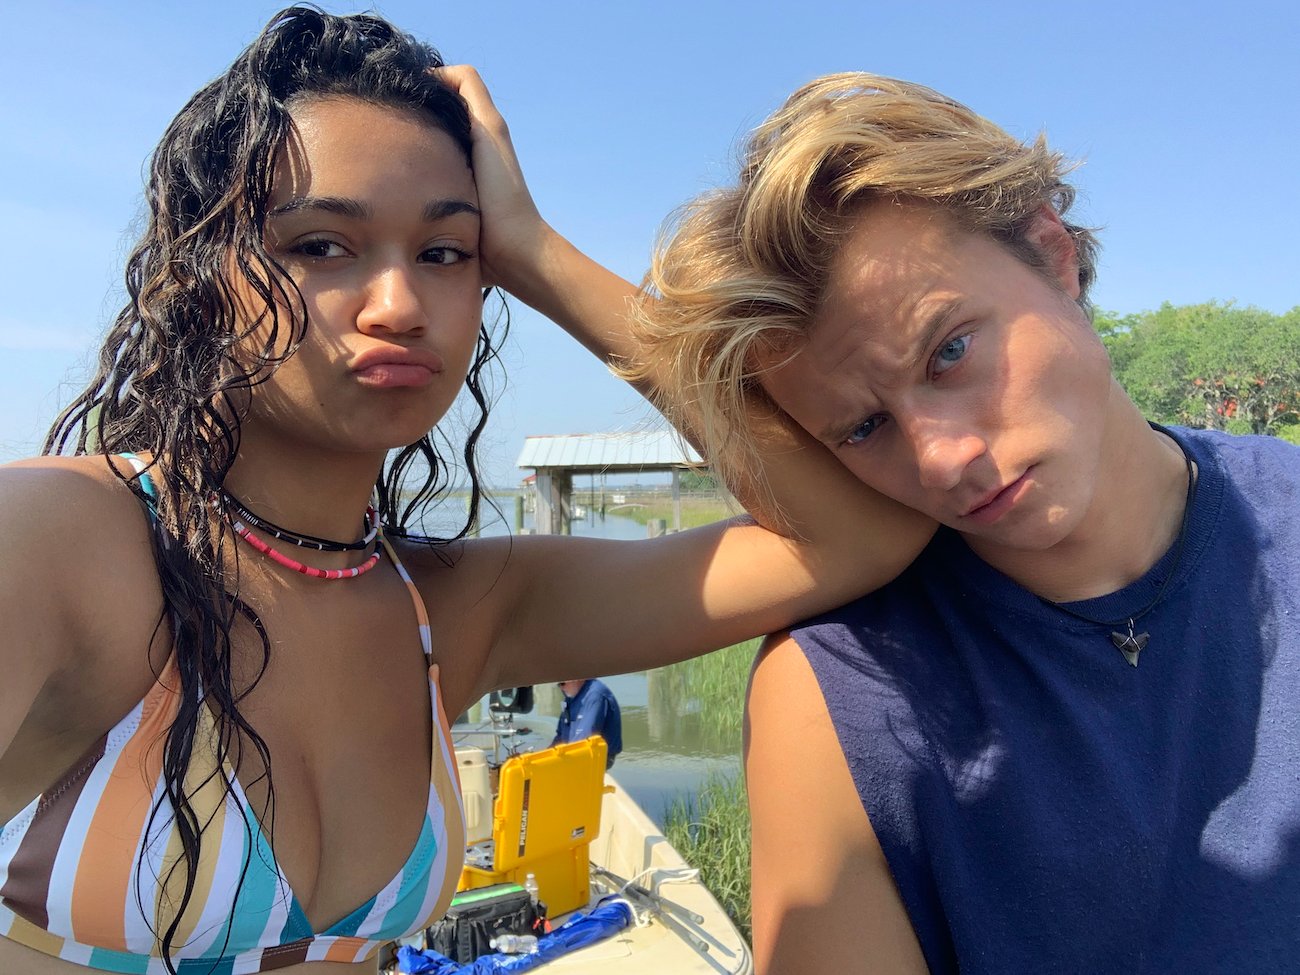 Madison Bailey and Rudy Pankow behind the scenes of 'Outer Banks' Season 1